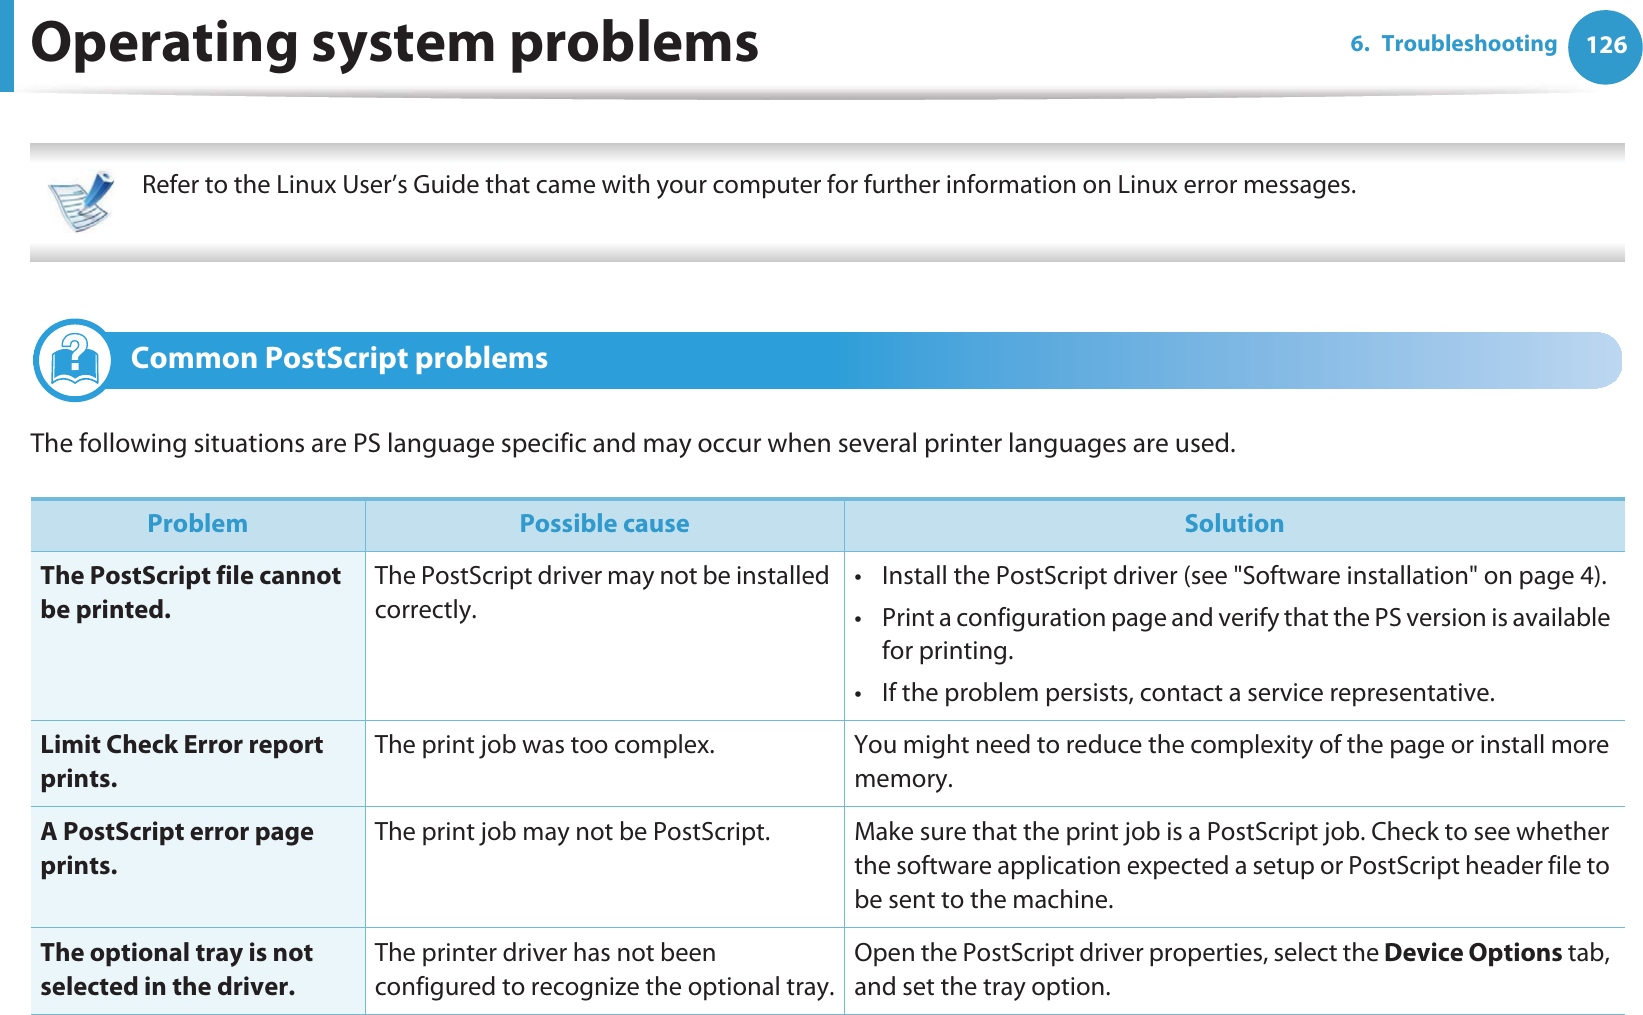 Operating system problems 1266. Troubleshooting Refer to the Linux User’s Guide that came with your computer for further information on Linux error messages. 4 Common PostScript problemsThe following situations are PS language specific and may occur when several printer languages are used.  Problem Possible cause SolutionThe PostScript file cannot be printed.The PostScript driver may not be installed correctly.• Install the PostScript driver (see &quot;Software installation&quot; on page 4).• Print a configuration page and verify that the PS version is available for printing.• If the problem persists, contact a service representative.Limit Check Error report prints.The print job was too complex. You might need to reduce the complexity of the page or install more memory.A PostScript error page prints.The print job may not be PostScript. Make sure that the print job is a PostScript job. Check to see whether the software application expected a setup or PostScript header file to be sent to the machine.The optional tray is not selected in the driver.The printer driver has not been configured to recognize the optional tray.Open the PostScript driver properties, select the Device Options tab, and set the tray option.